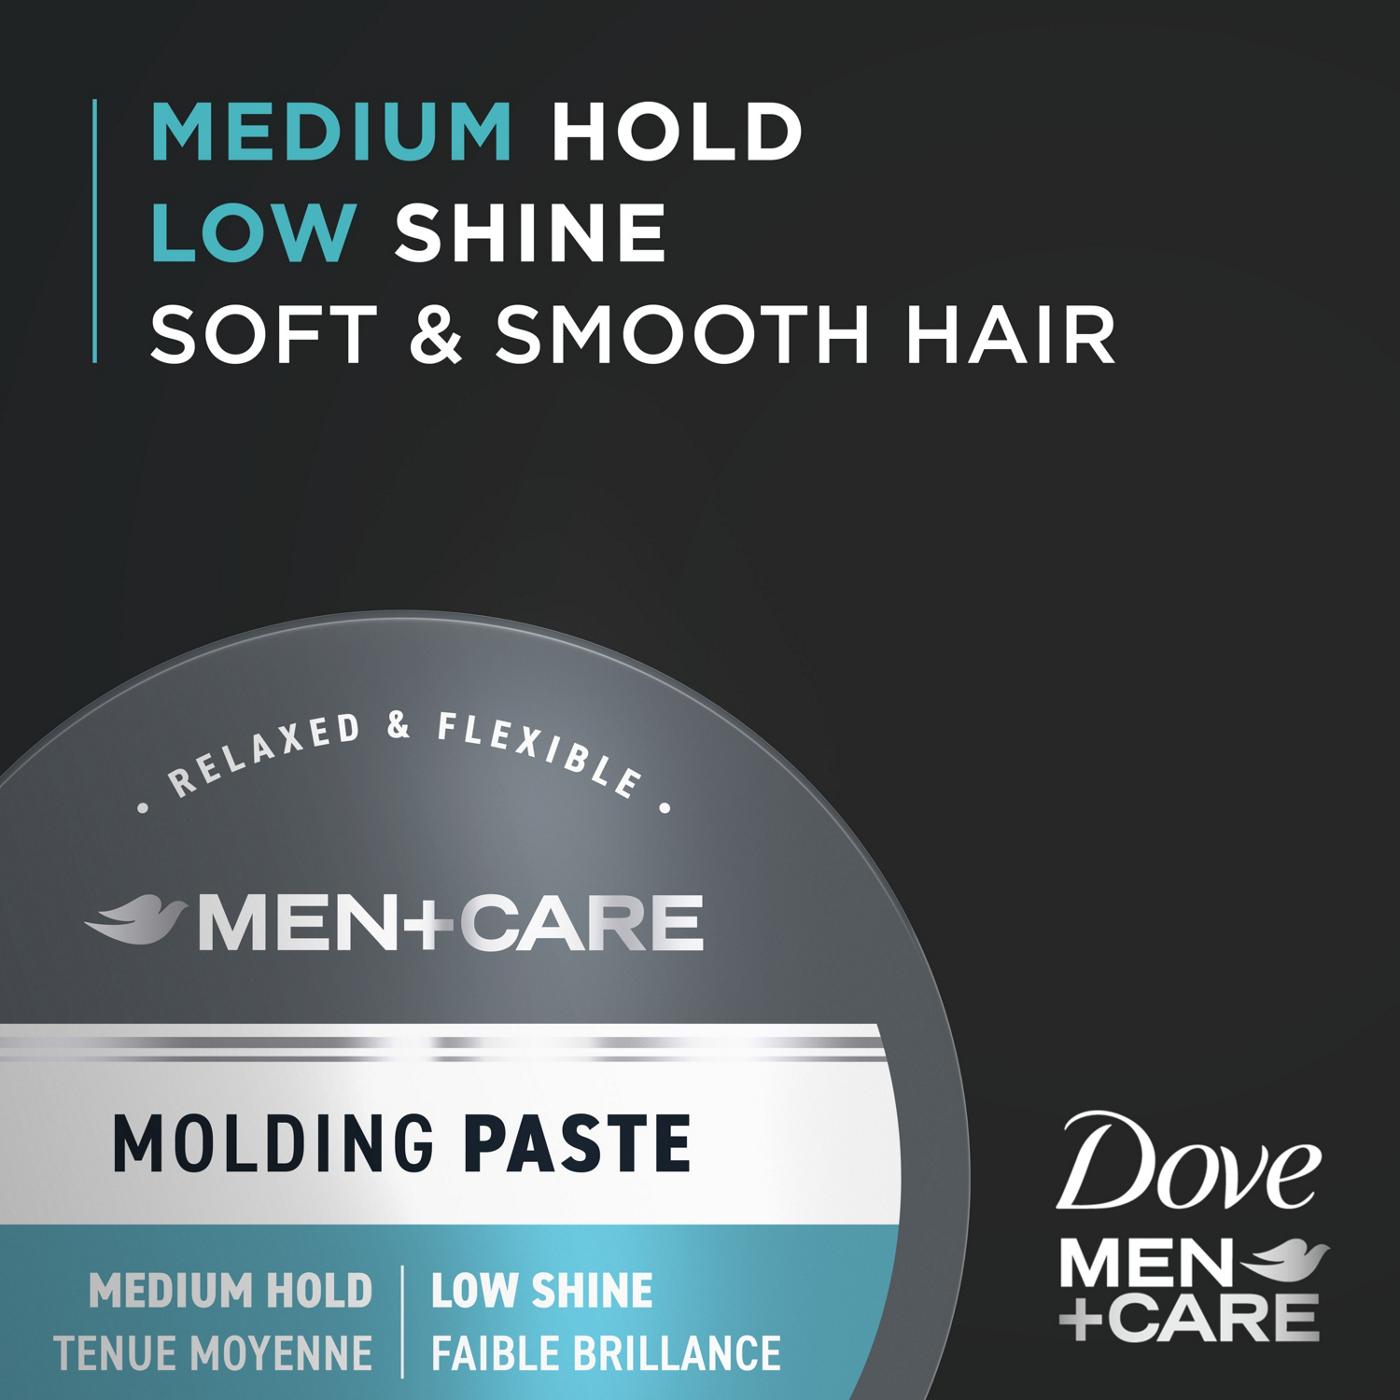 Dove Men+Care Styling Aid Sculpting Hair Paste; image 4 of 6